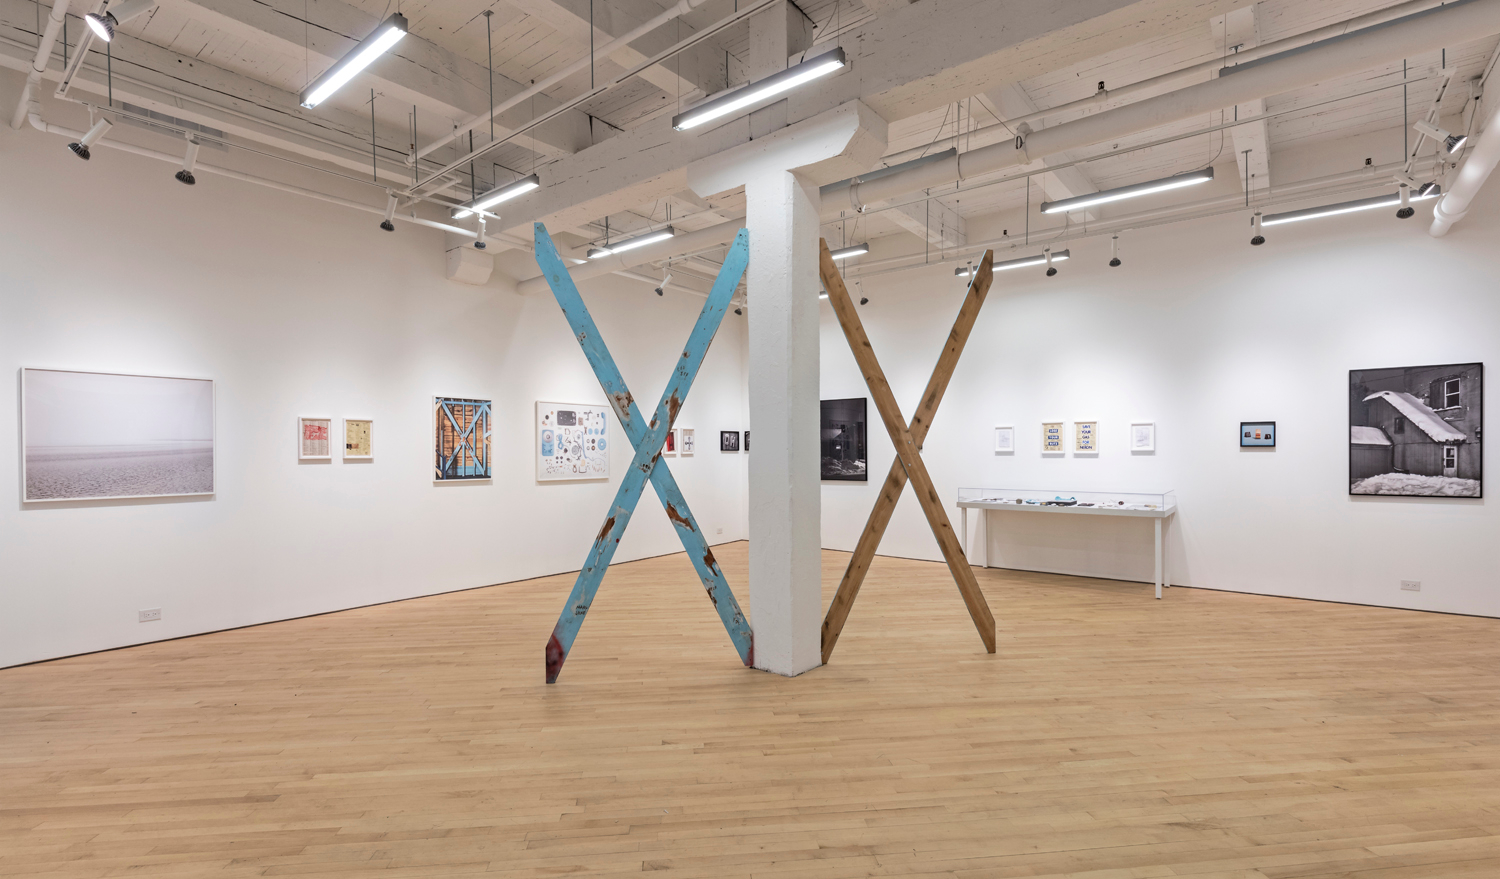     Installation view of Christian Patterson, Bottom of the Lake, Photo: Toni Hafkenscheid 

